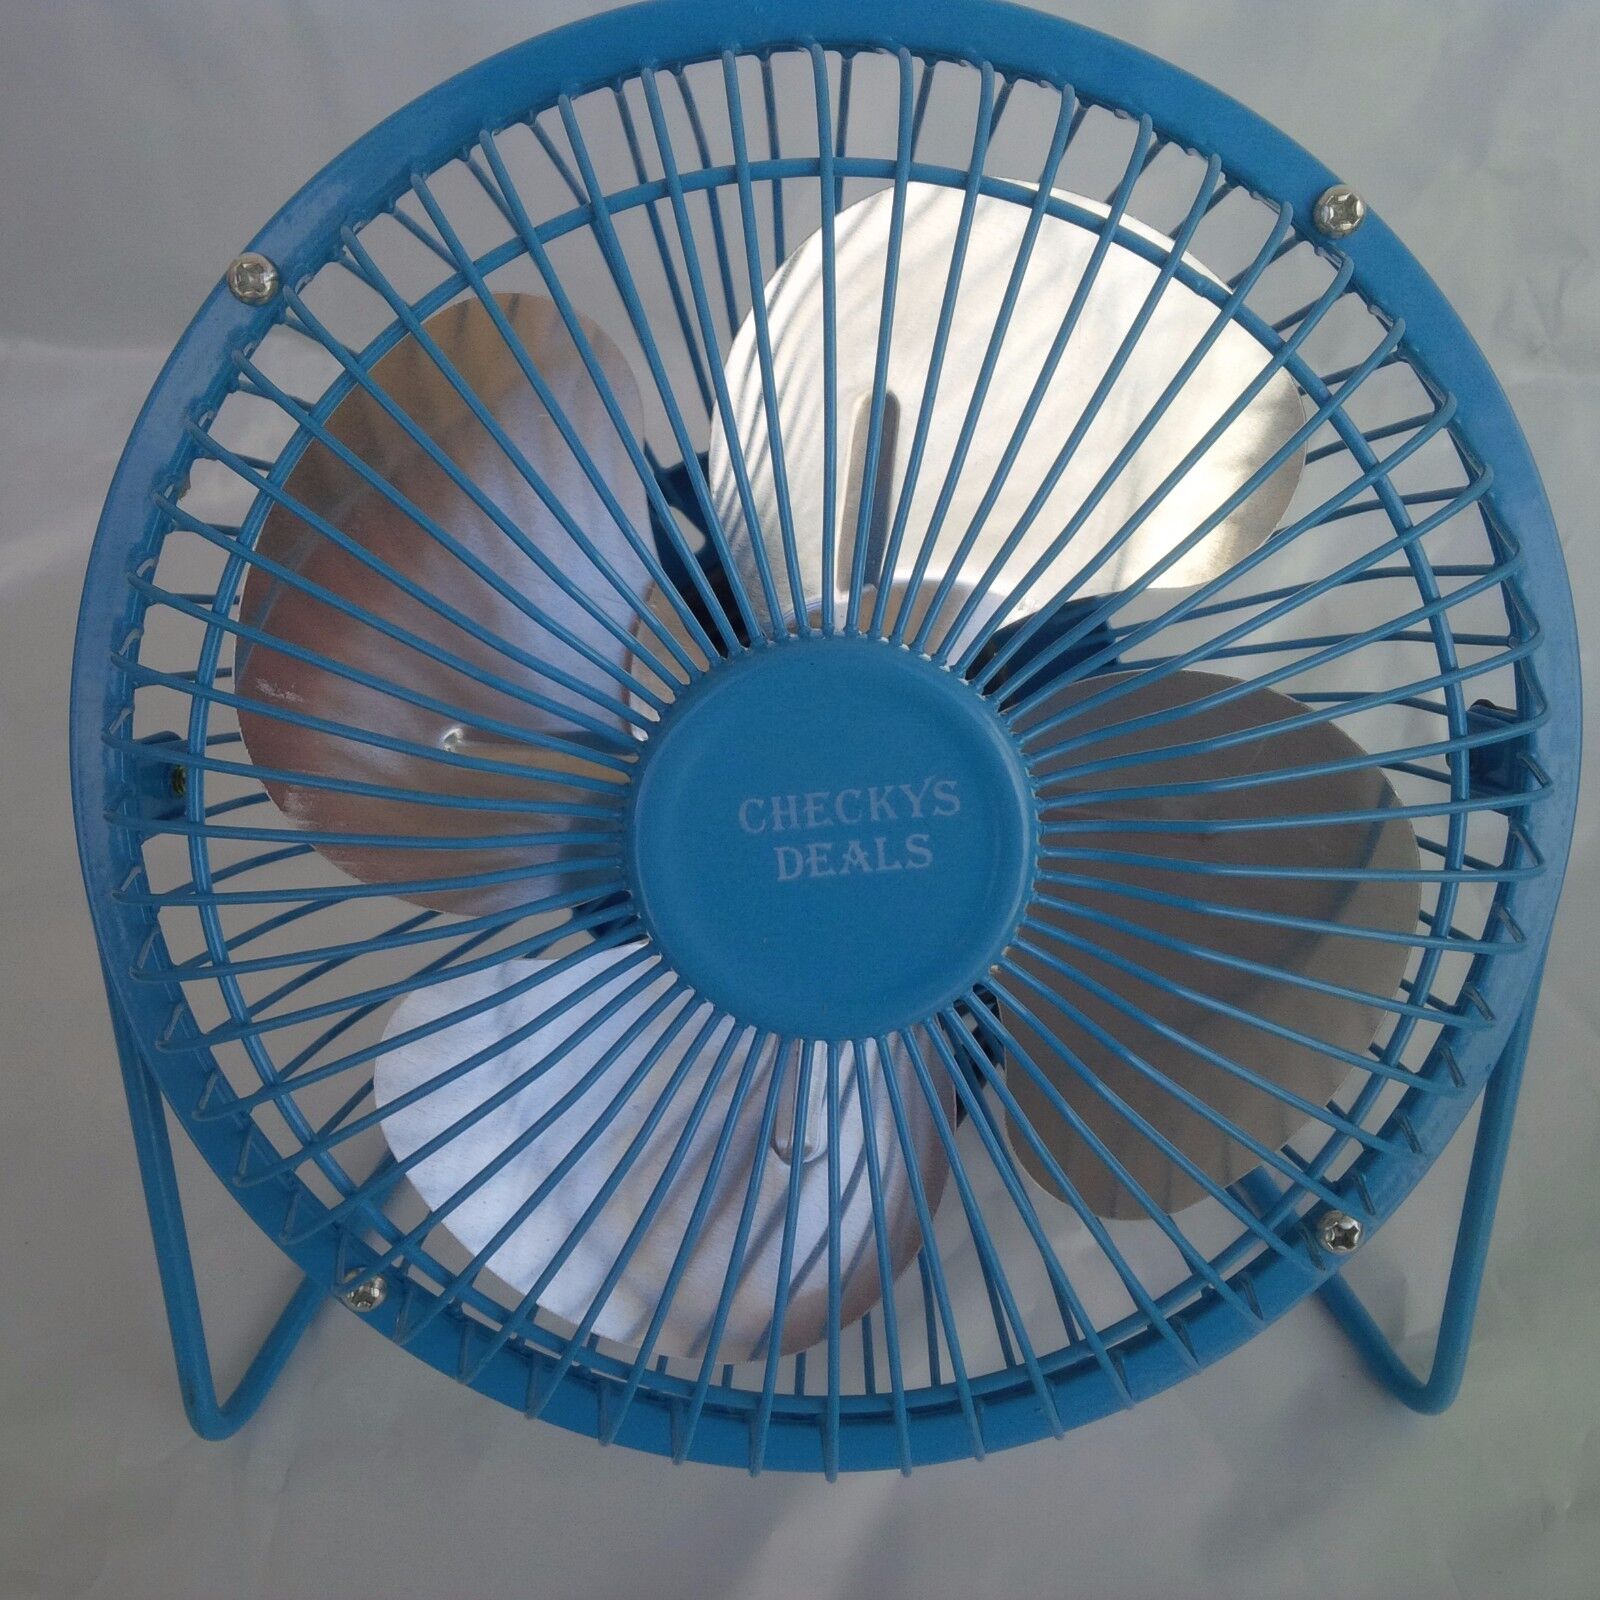 CHECKYS DEALS 6 INCH METAL FAN USB CONNECT BLUE COMPUTER OFFICE WORK HOME CAR